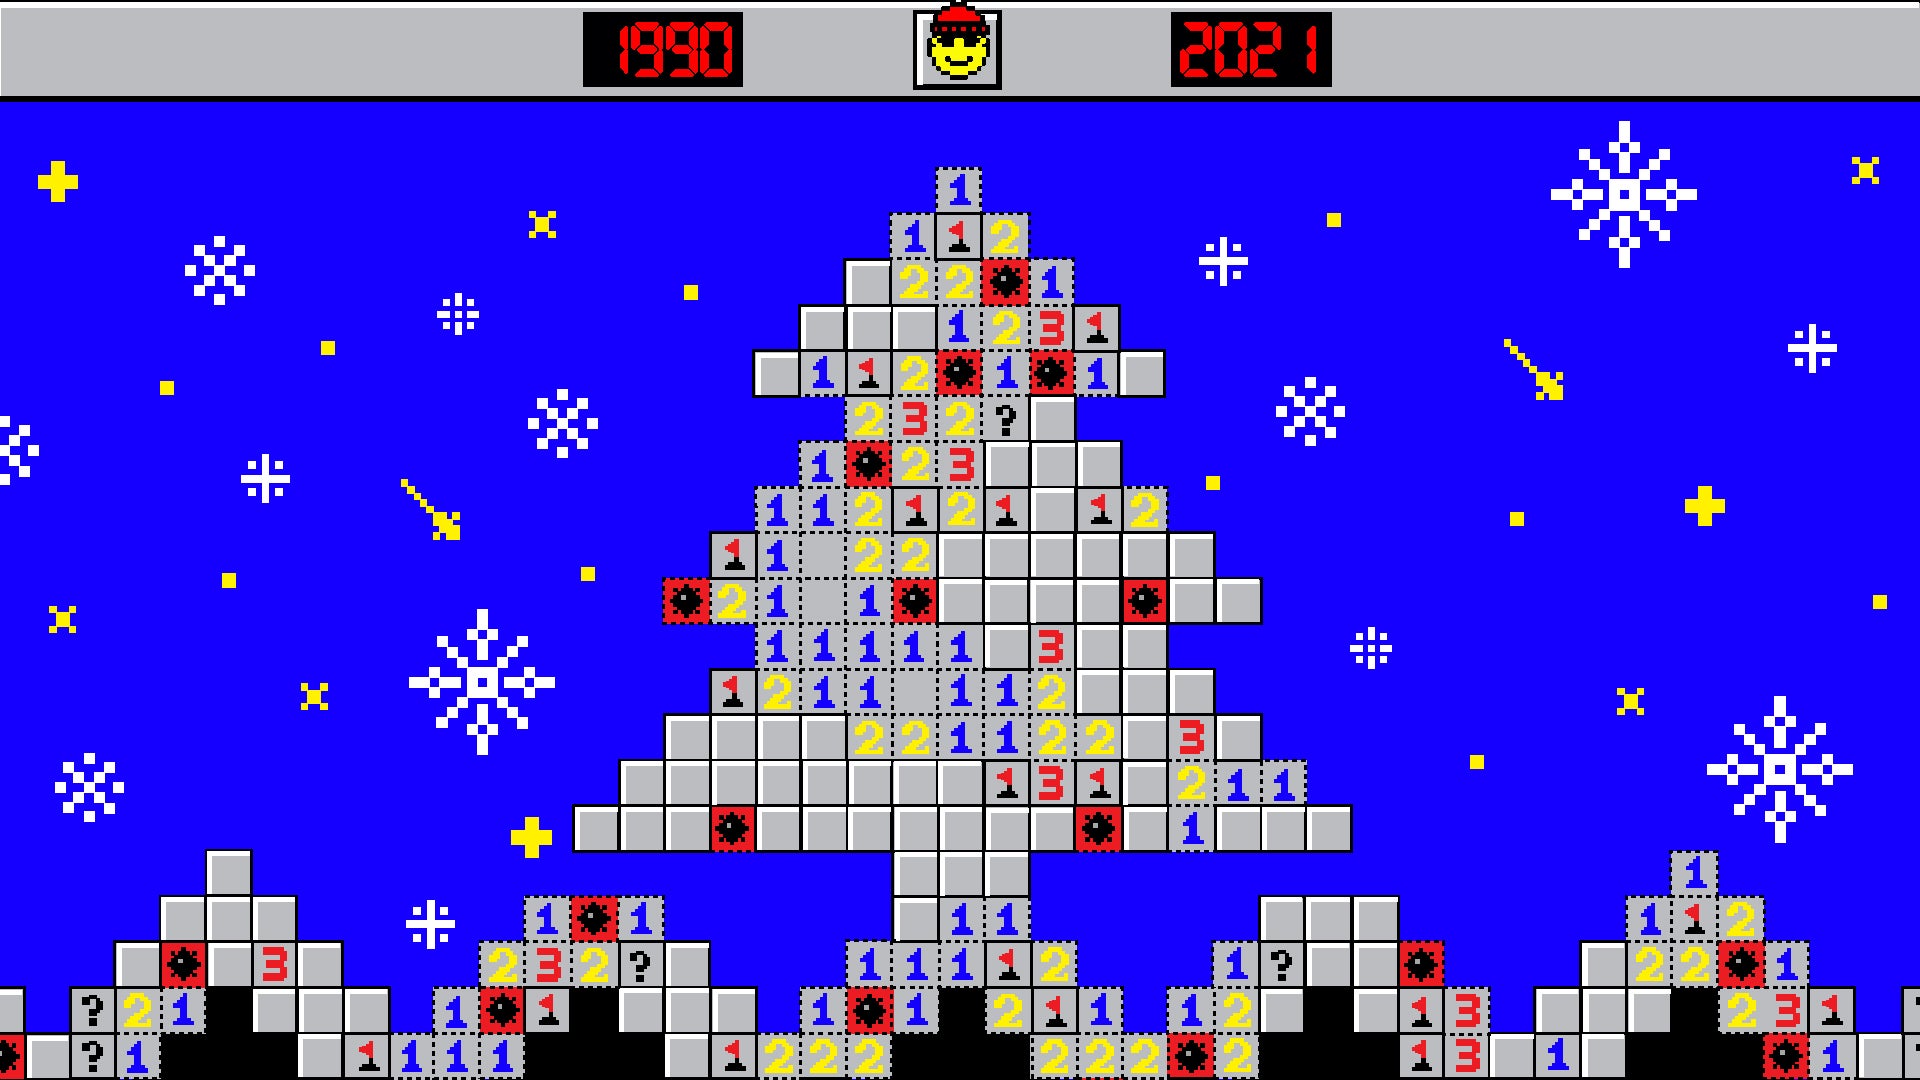 Artwork from Microsoft's Minesweeper Ugly Christmas Sweater.